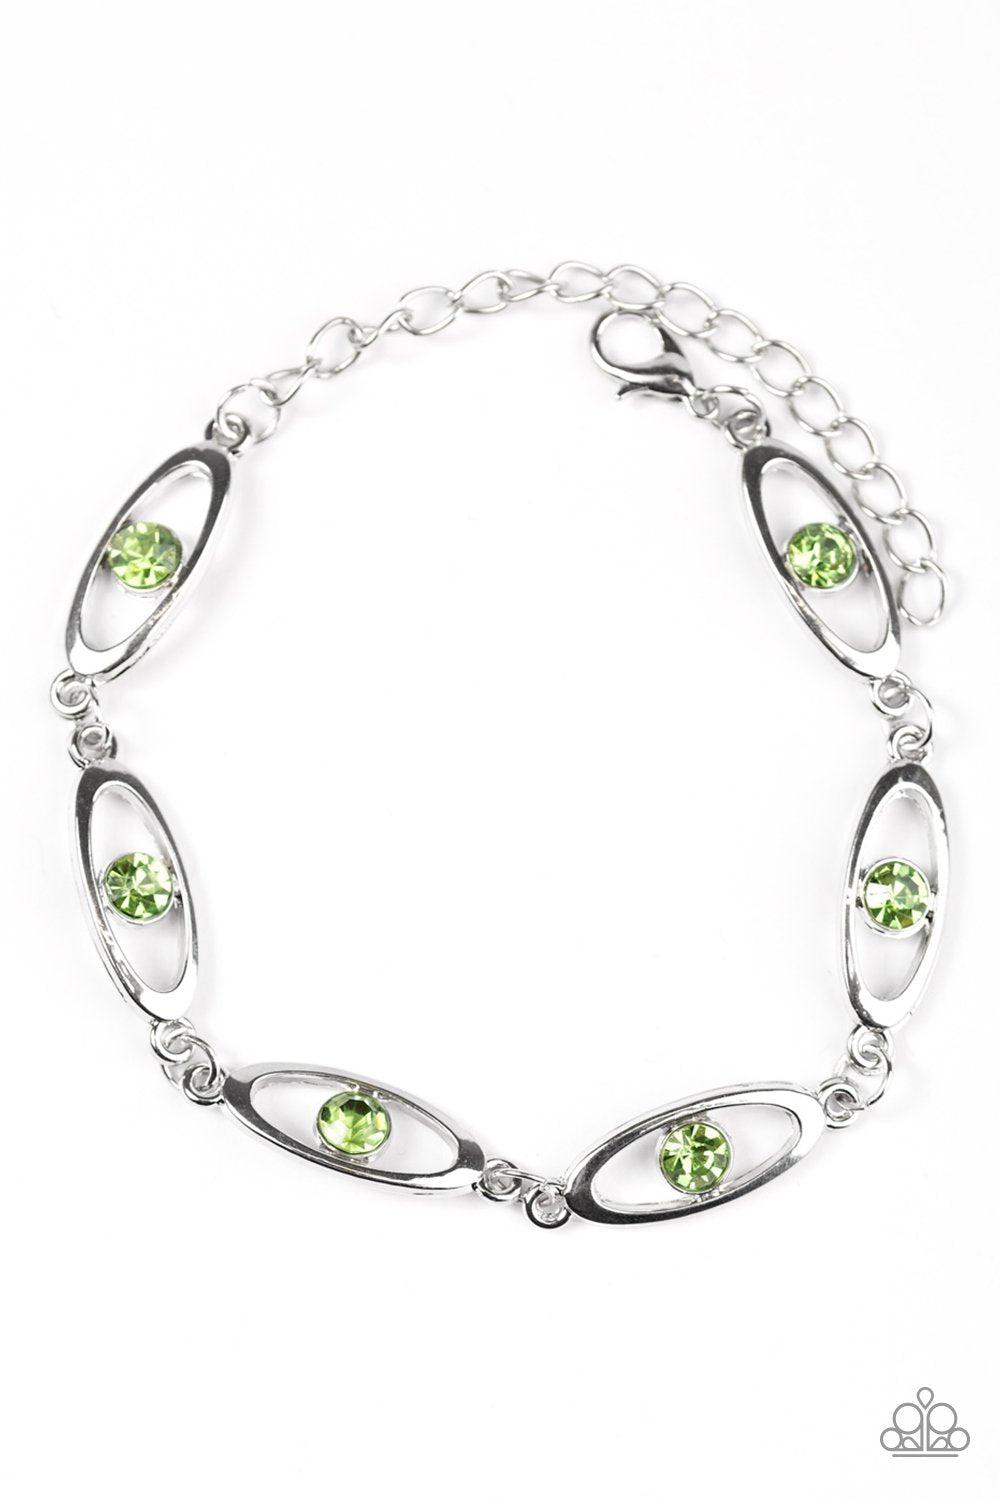 Starry Eyed Silver and Green Rhinestone Bracelet - Paparazzi Accessories-CarasShop.com - $5 Jewelry by Cara Jewels